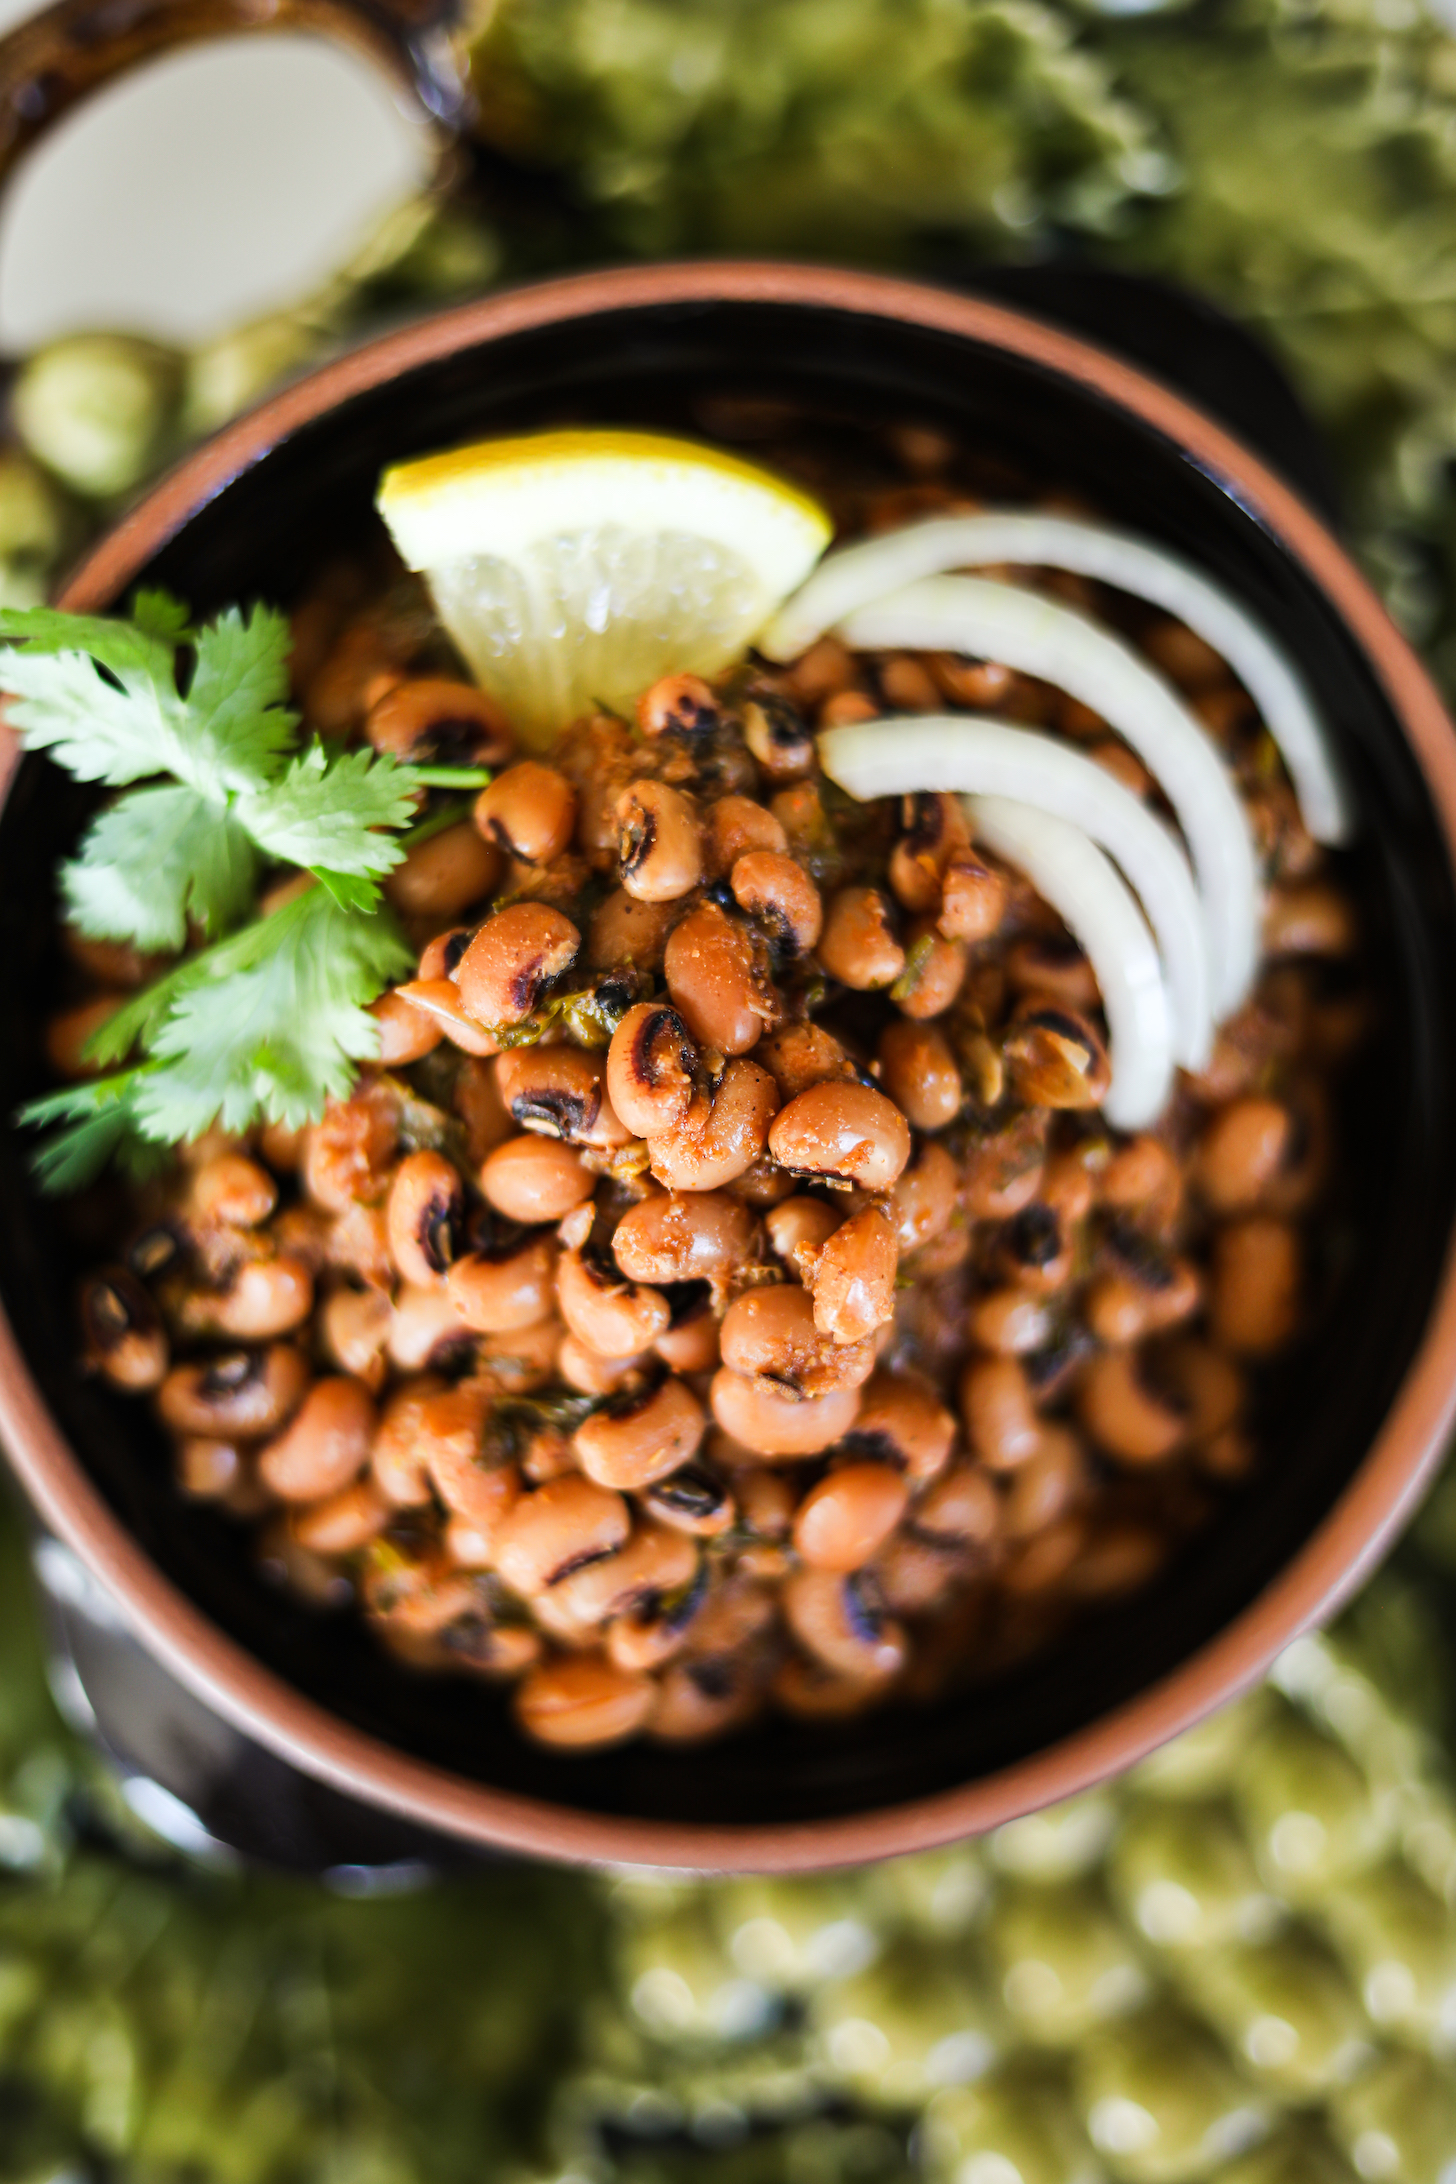 Close up image of a clay pot with lobia curry or black eyed peas garnished with lemon slice, onion and cilantro.